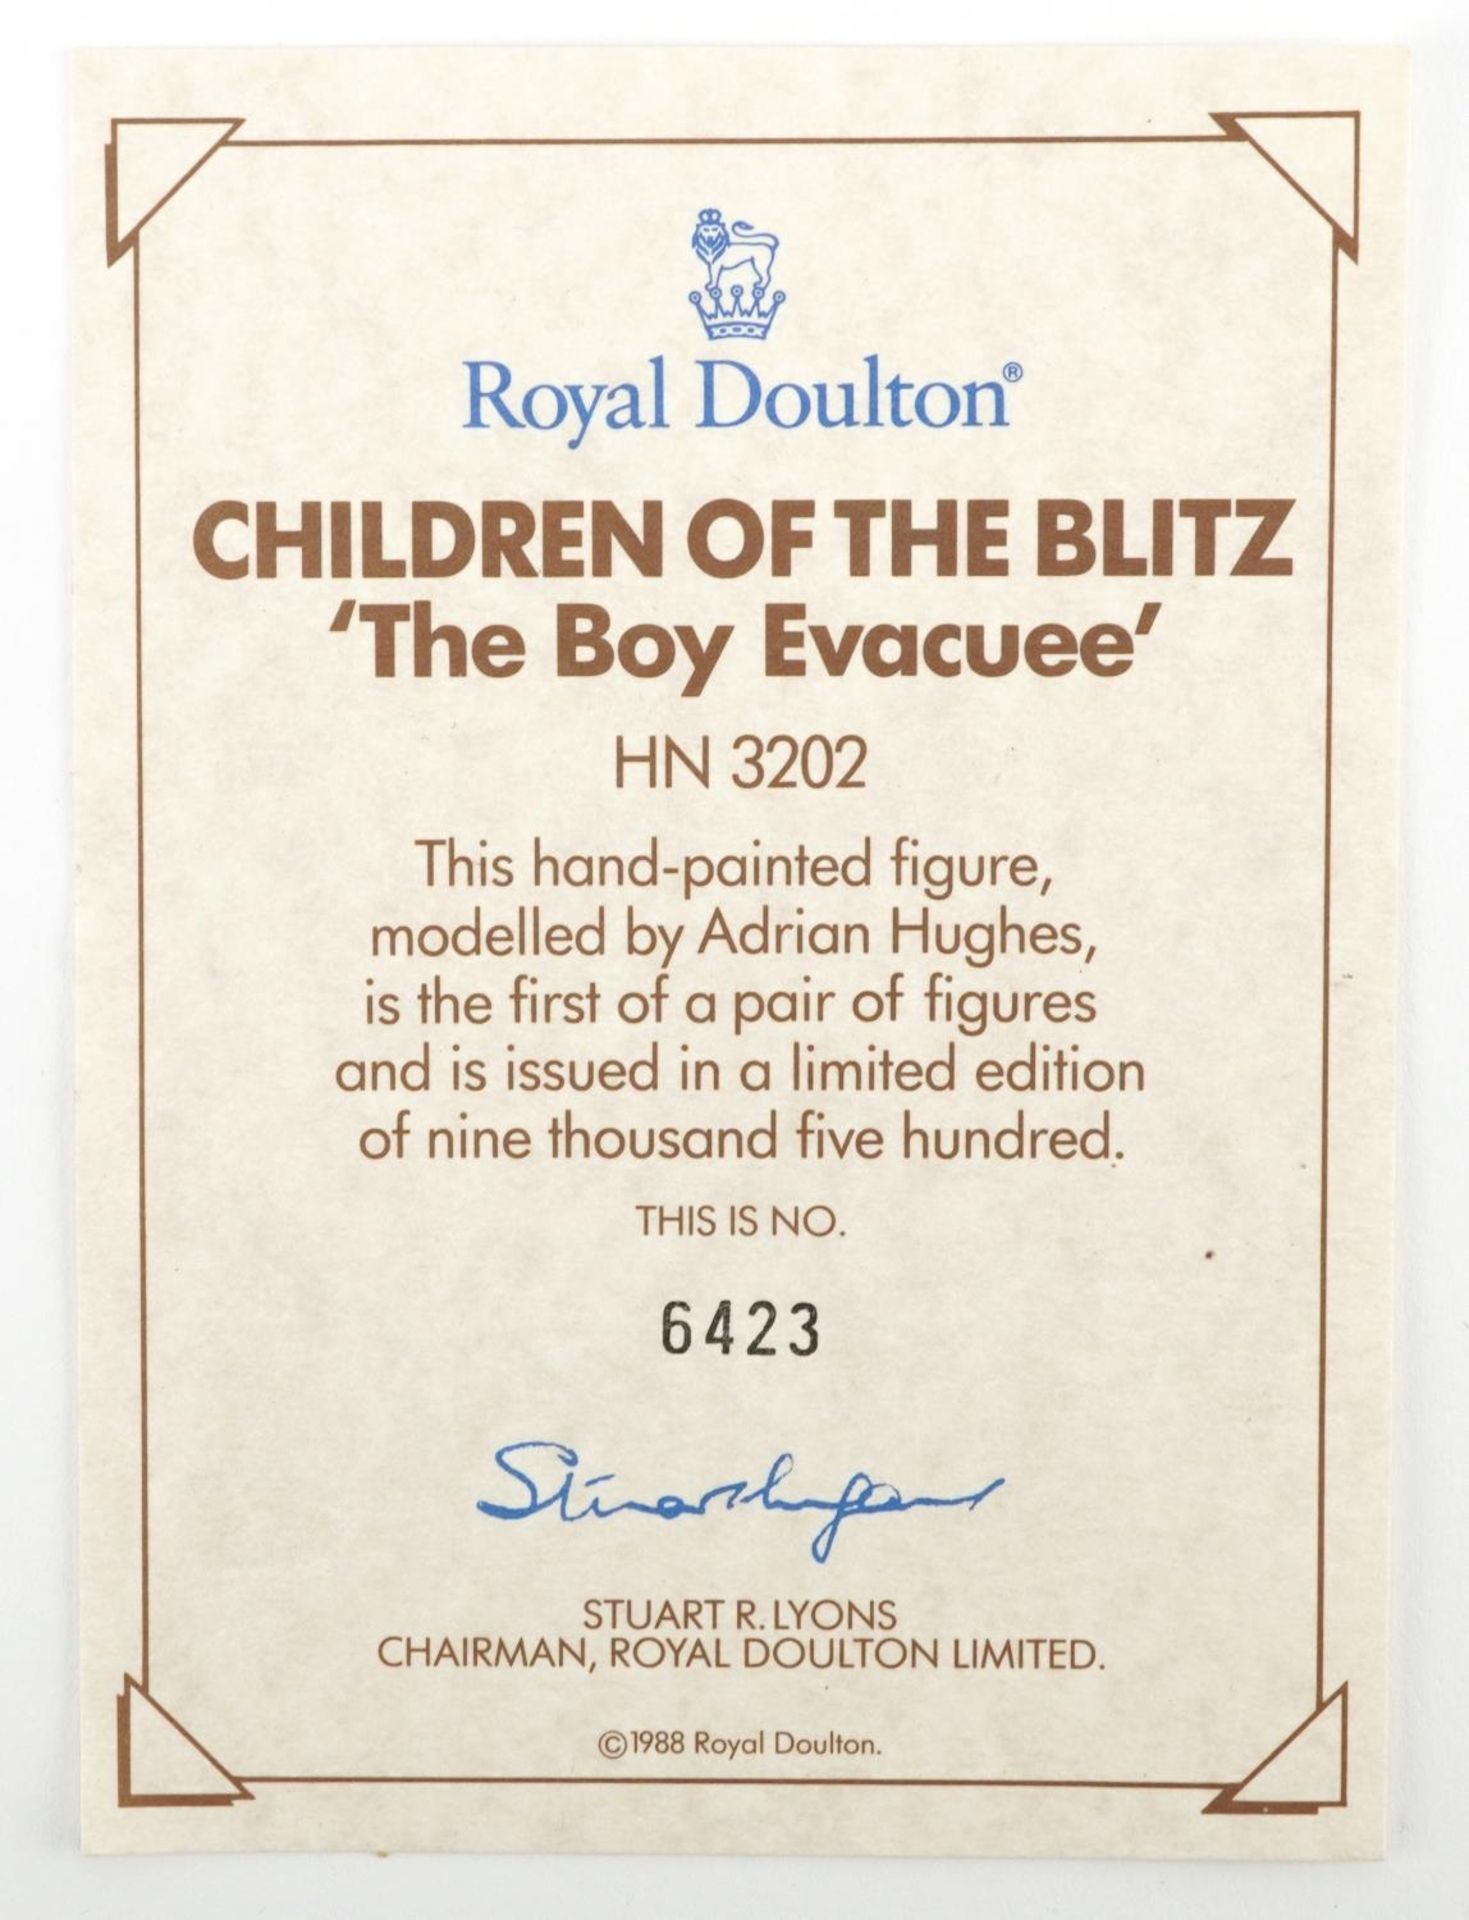 Royal Doulton The Boy Evacuee figure HN3202 with certificate, limited edition 6423/9500, 21cm high - Image 4 of 4